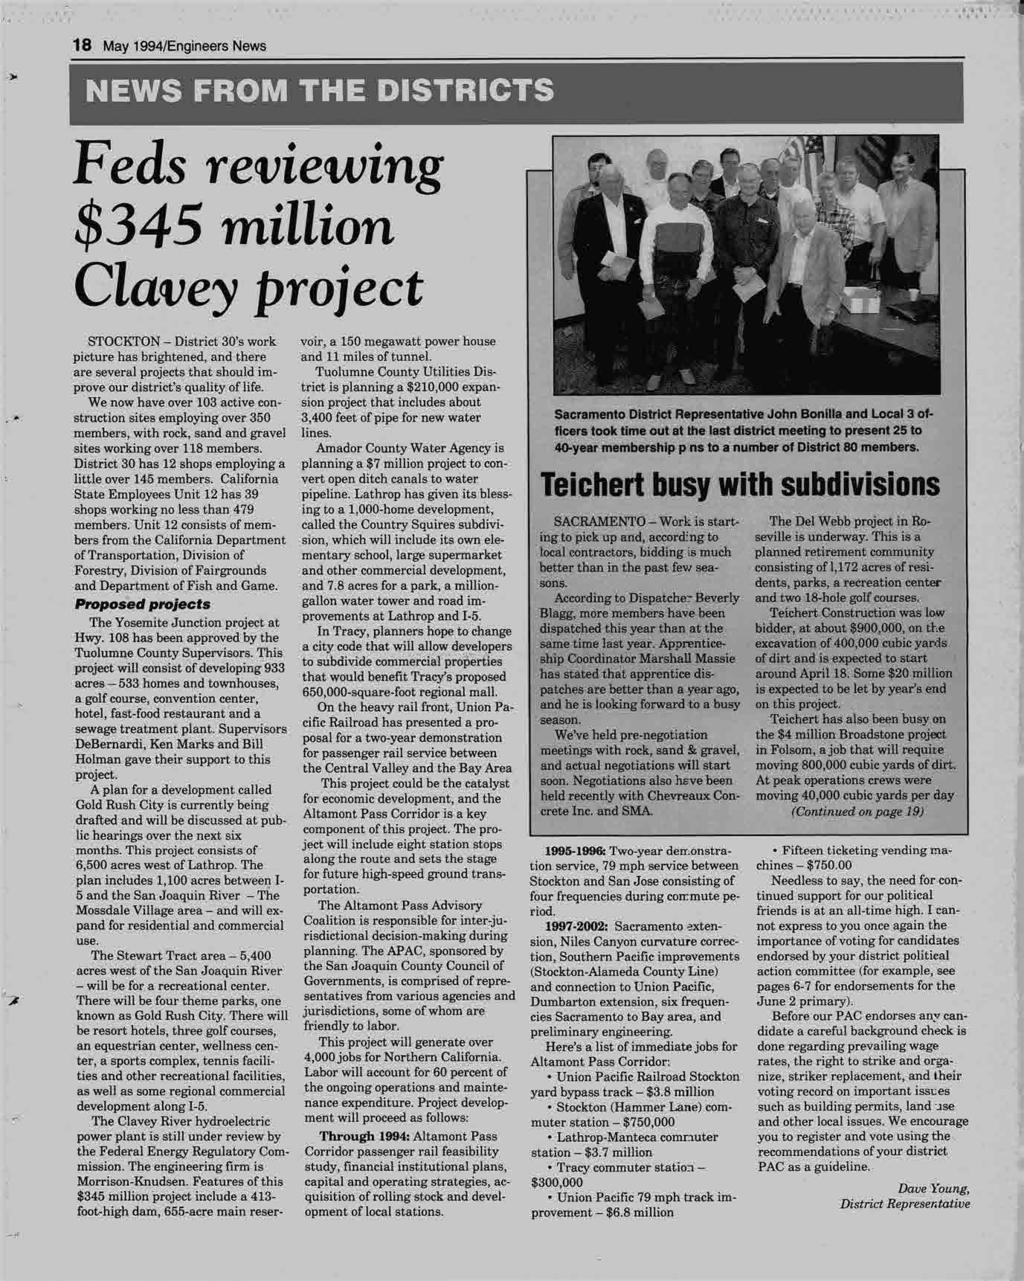 ''.''I, '''ll, I '.'',......, *.4., 18 May 1994/Engineers News NEWS FROM THE DISTRICTS Feds reviewing -*~~ ~ -+ r-* 7< *44 $345 million~r.4 ". 1 fg@, Clavey project -'.